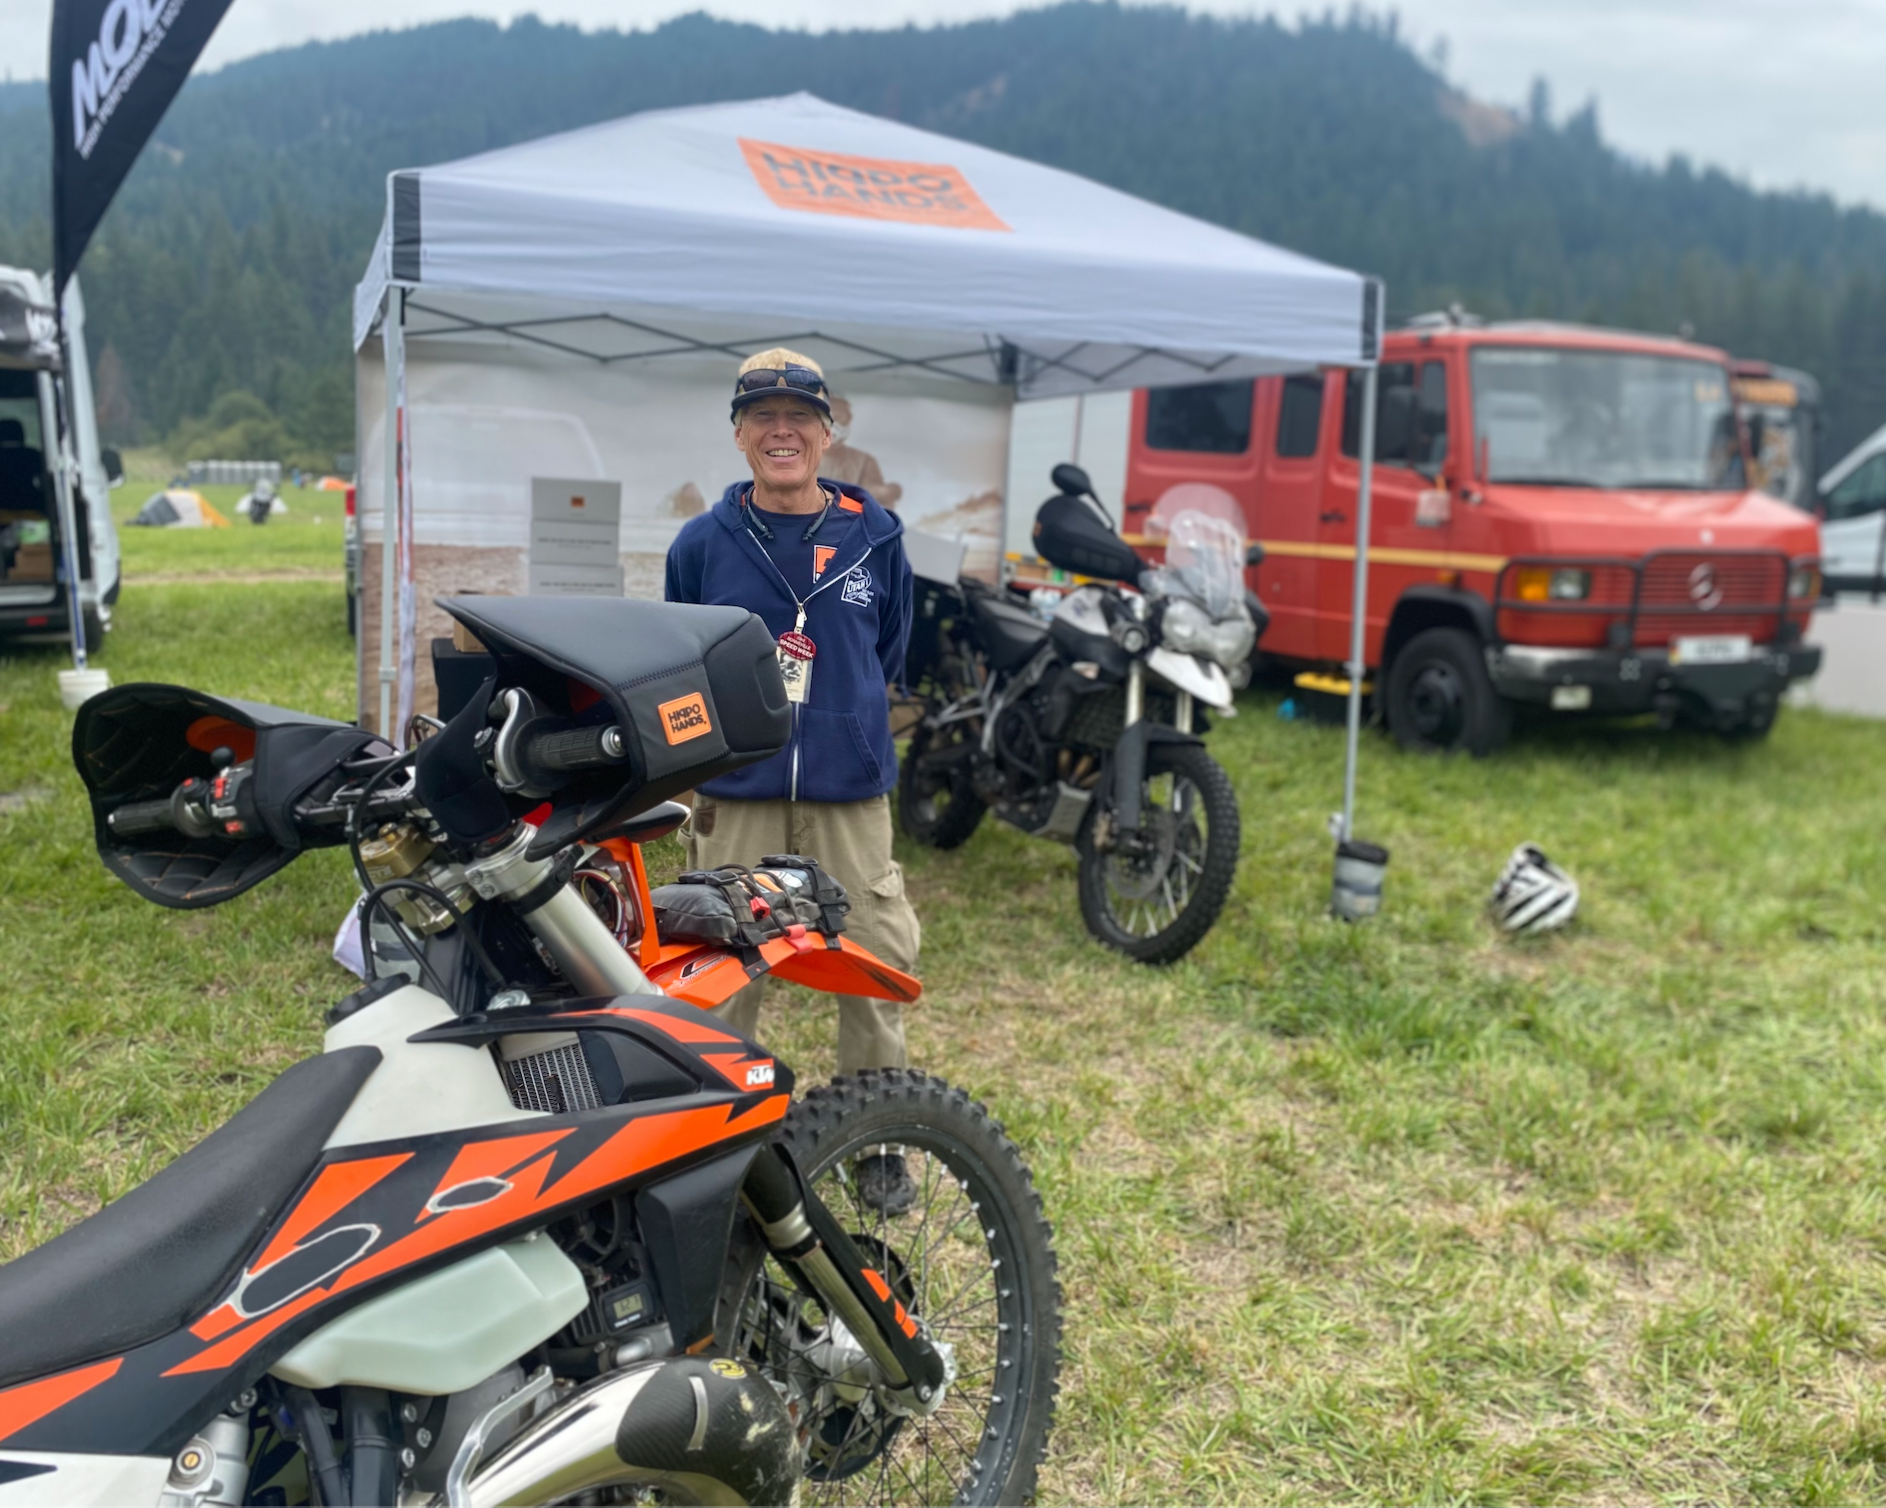 Hippo Hands at the Touratech Rally 2021 in Plain, WA